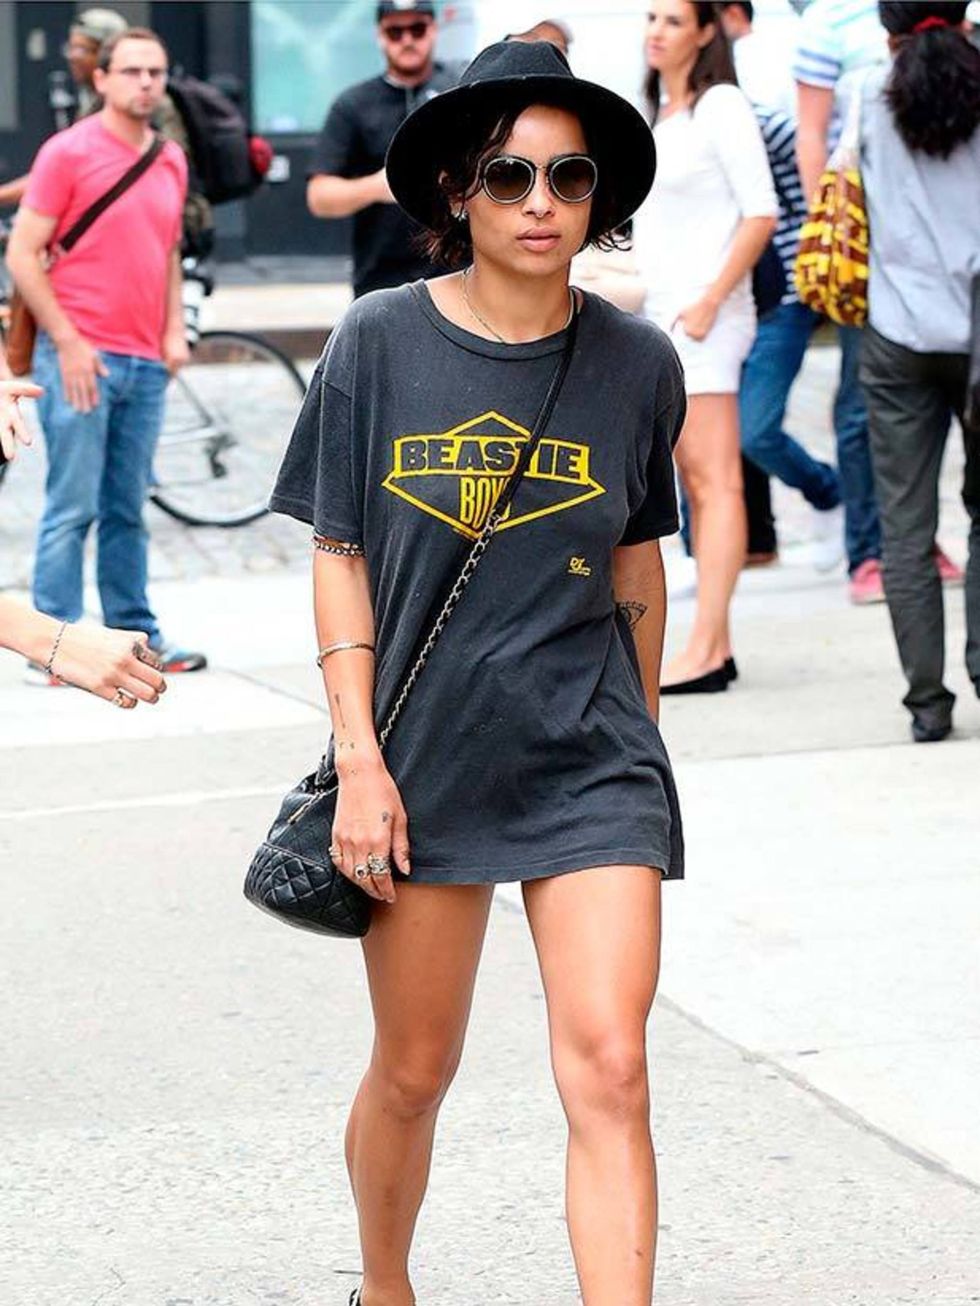 <p>Zoë Kravitz can pull off any look, but looks right at home in this oversized Beastie boys tee. </p>